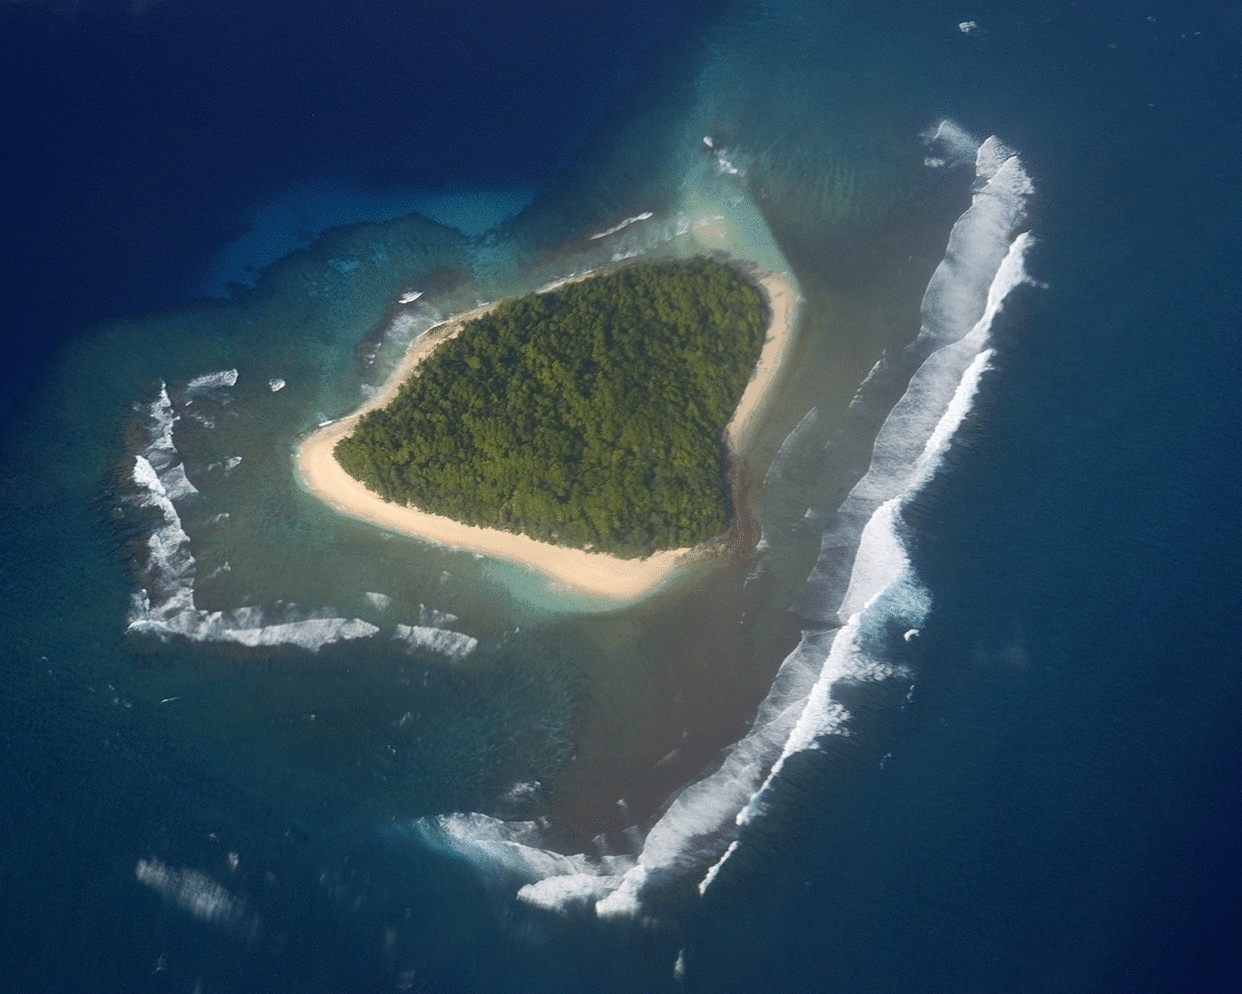 One of the islands, Kuwajelein, of the Marshall Islands, where 67 nuclear tests harmed the local population during the 50s and 60s: Rex Features